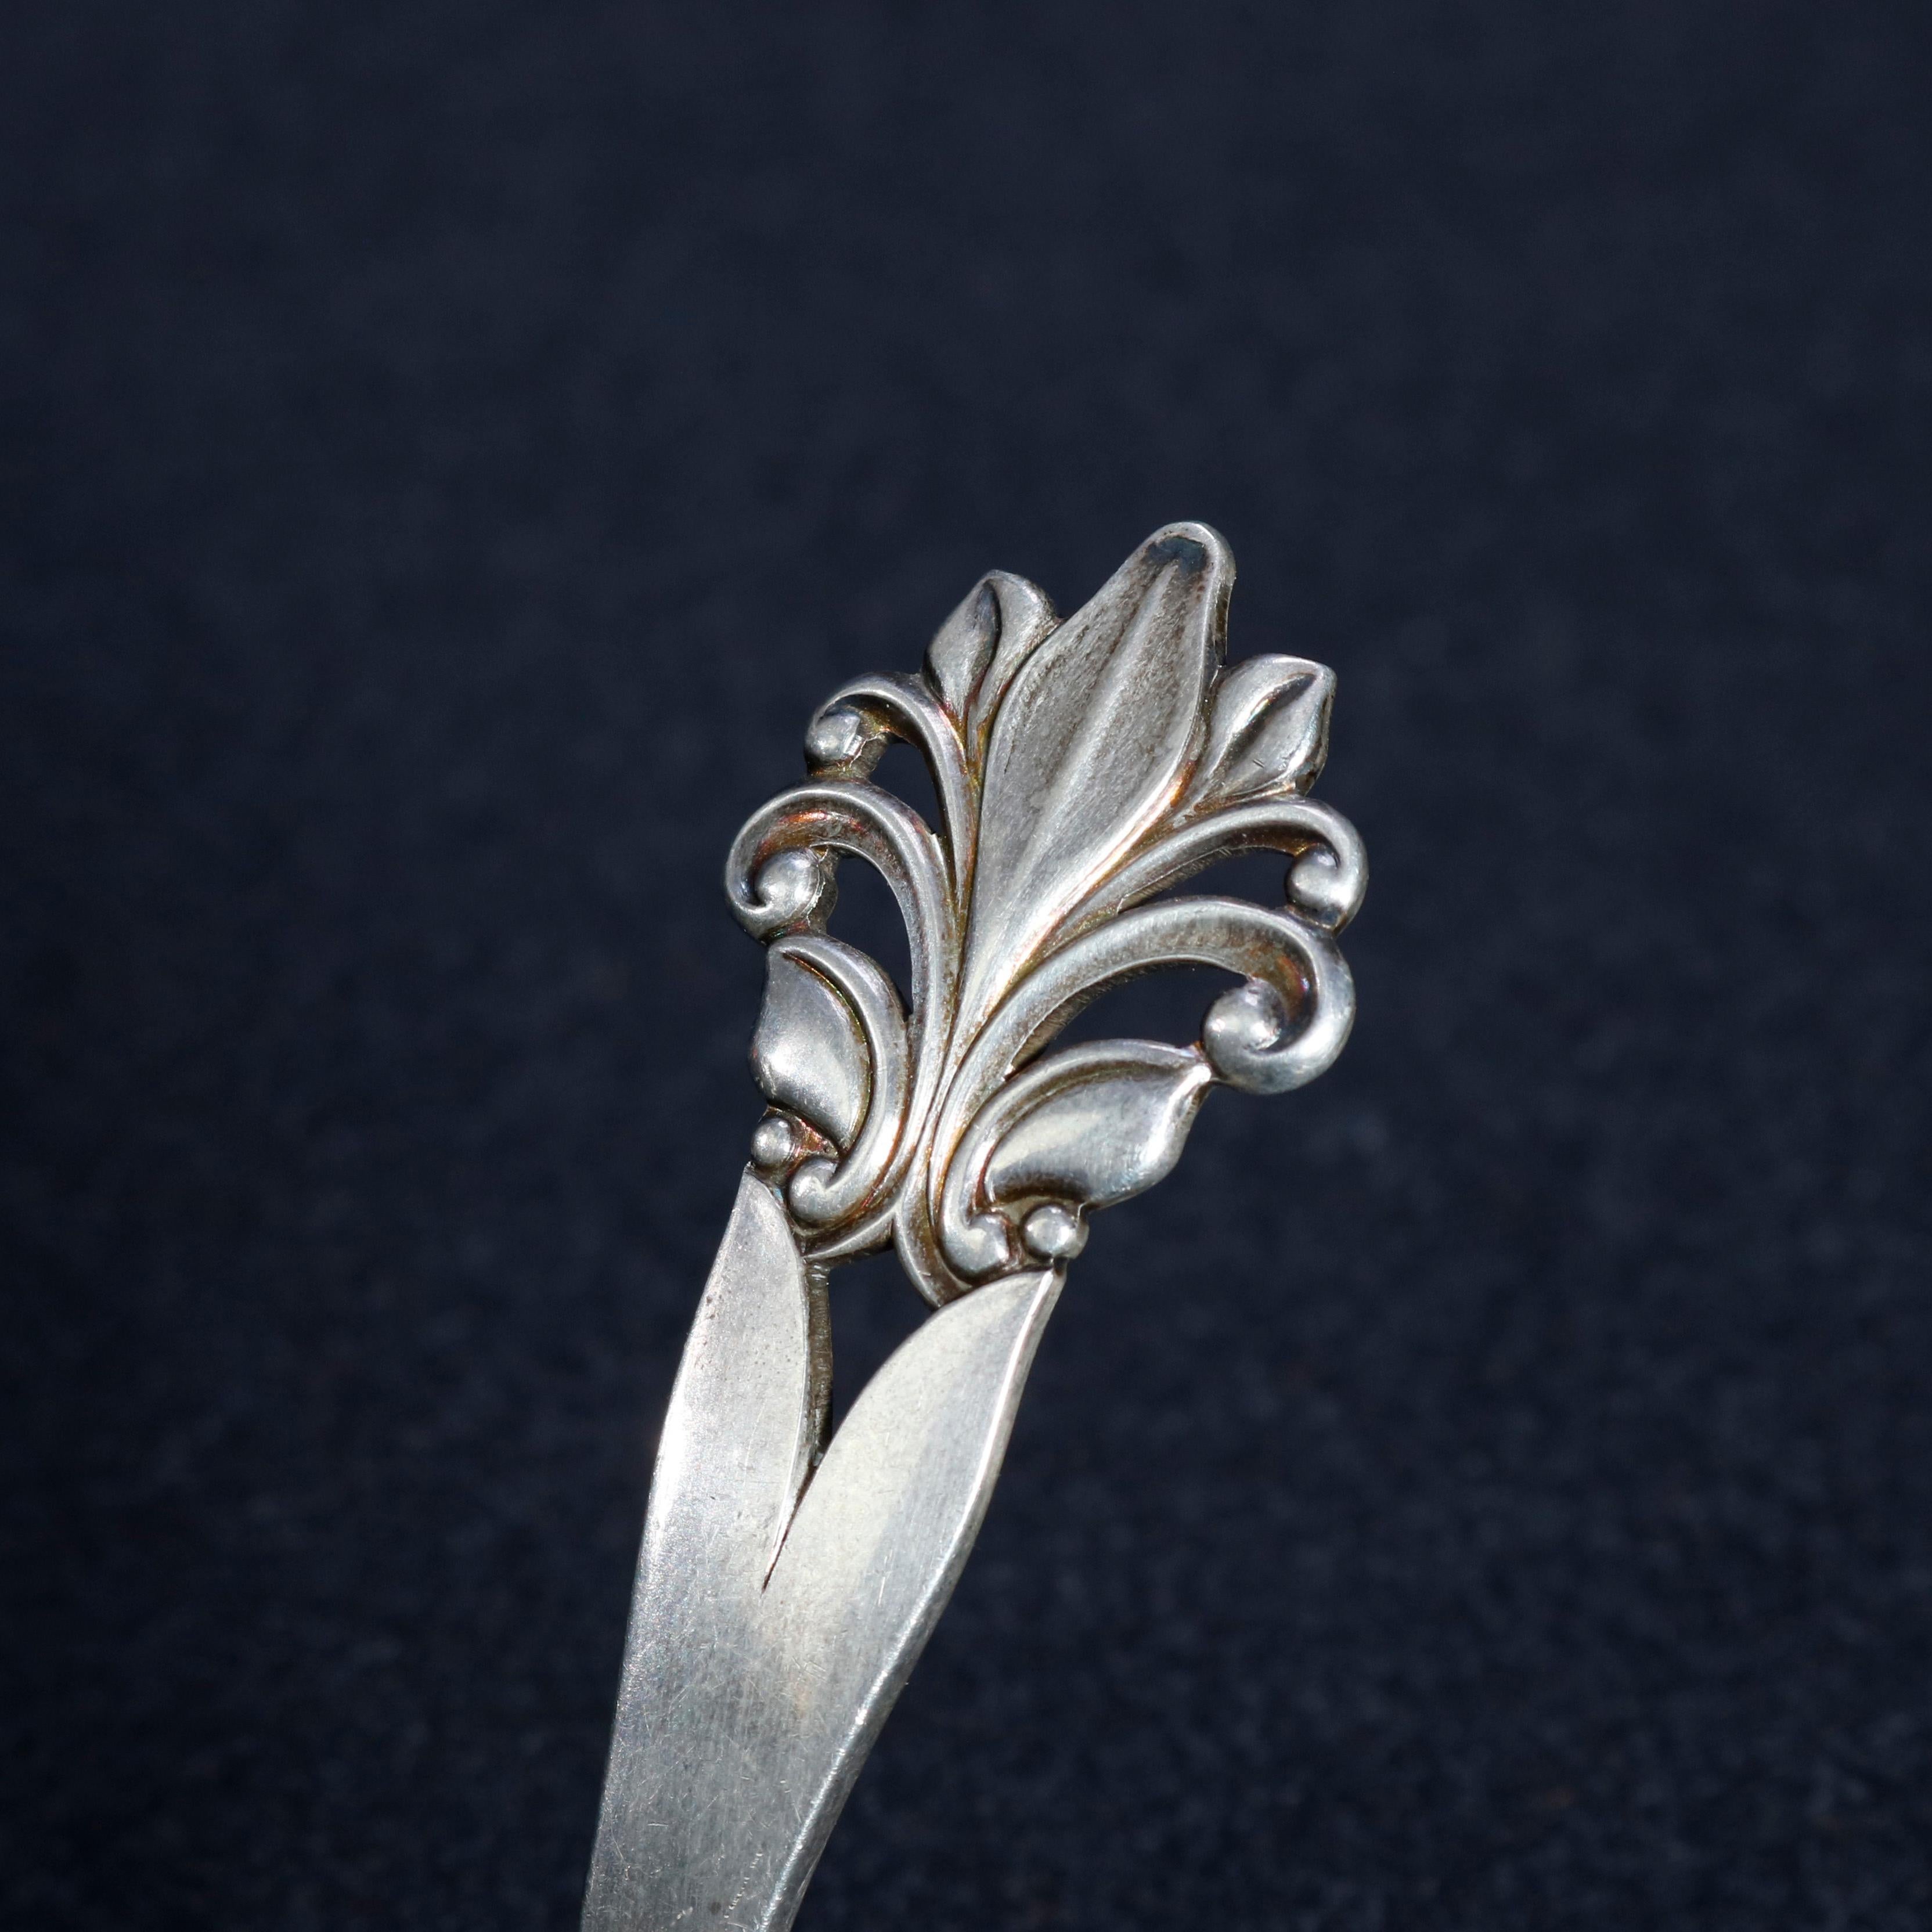 An antique Danish Arts & Crafts sterling silver pie server by Georg Jensen offers pierced handle terminating in a palmette finial, signed en verso on handle, circa 1920

***DELIVERY NOTICE – Due to COVID-19 we are employing NO-CONTACT PRACTICES in